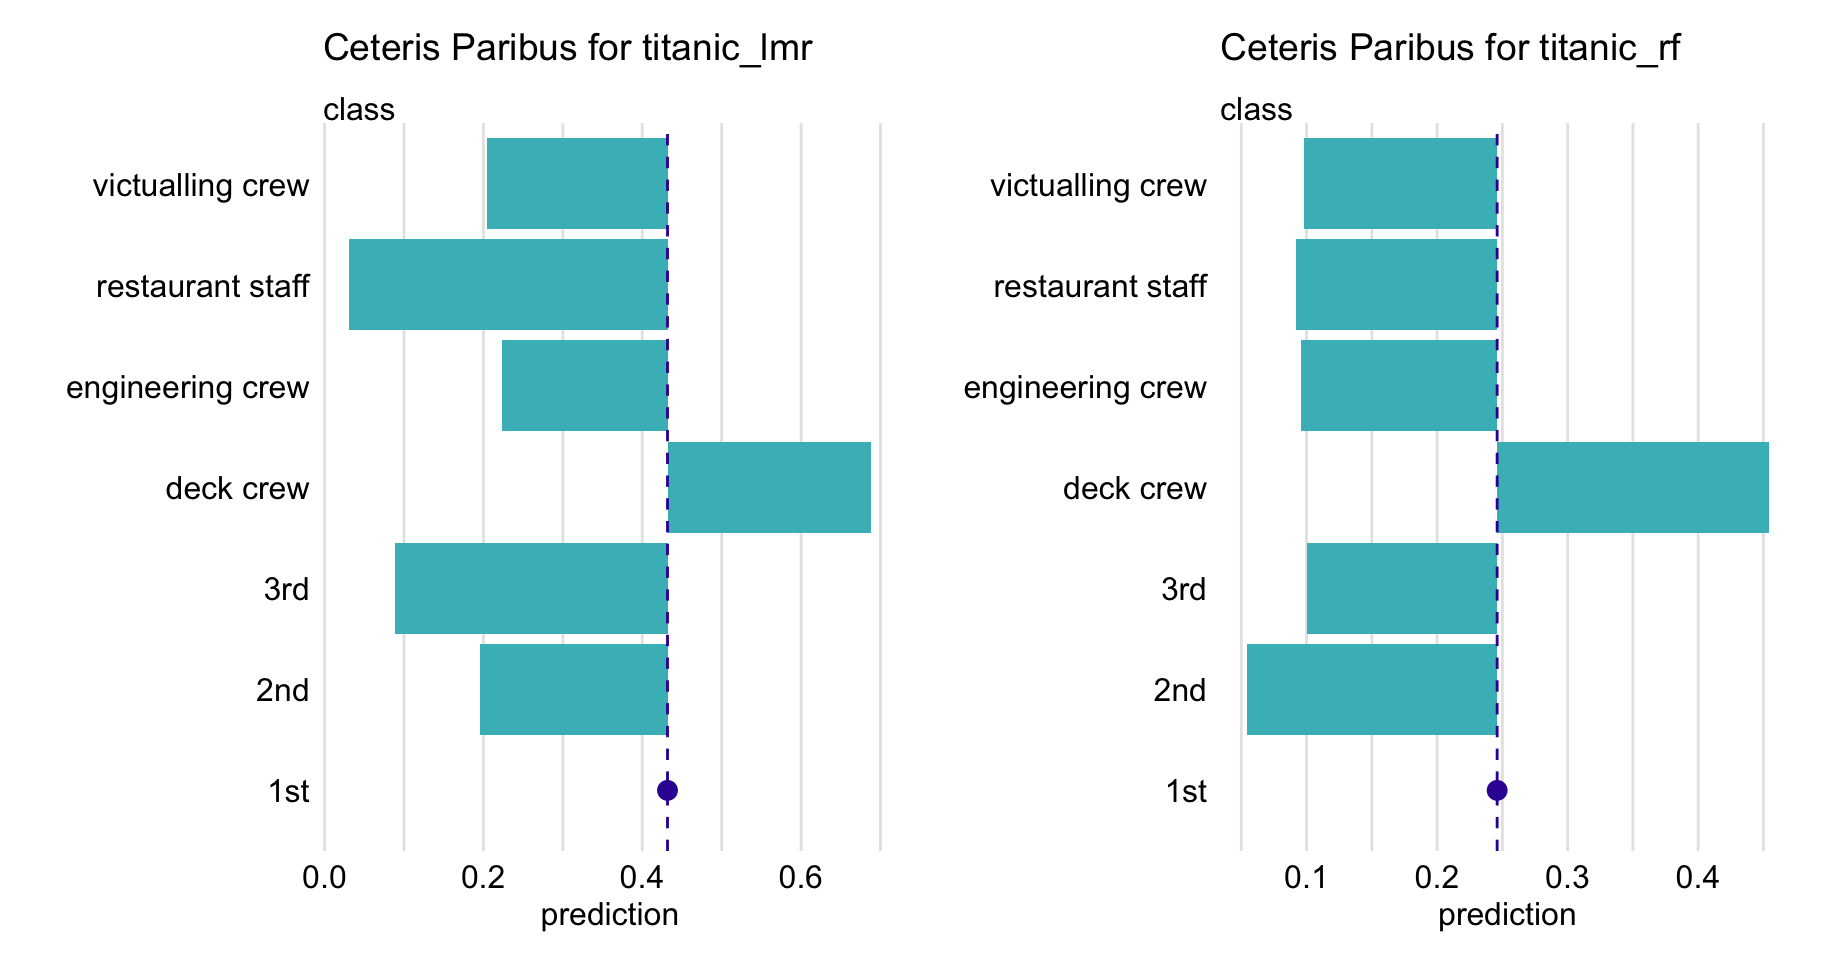 Ceteris-paribus profiles for variable class for the logistic regression (titanic_lmr) and random forest (titanic_rf ) models that predict the probability of surviving of passenger Henry based on the Titanic data. Dots indicate the values of the variable and of the prediction for Henry.